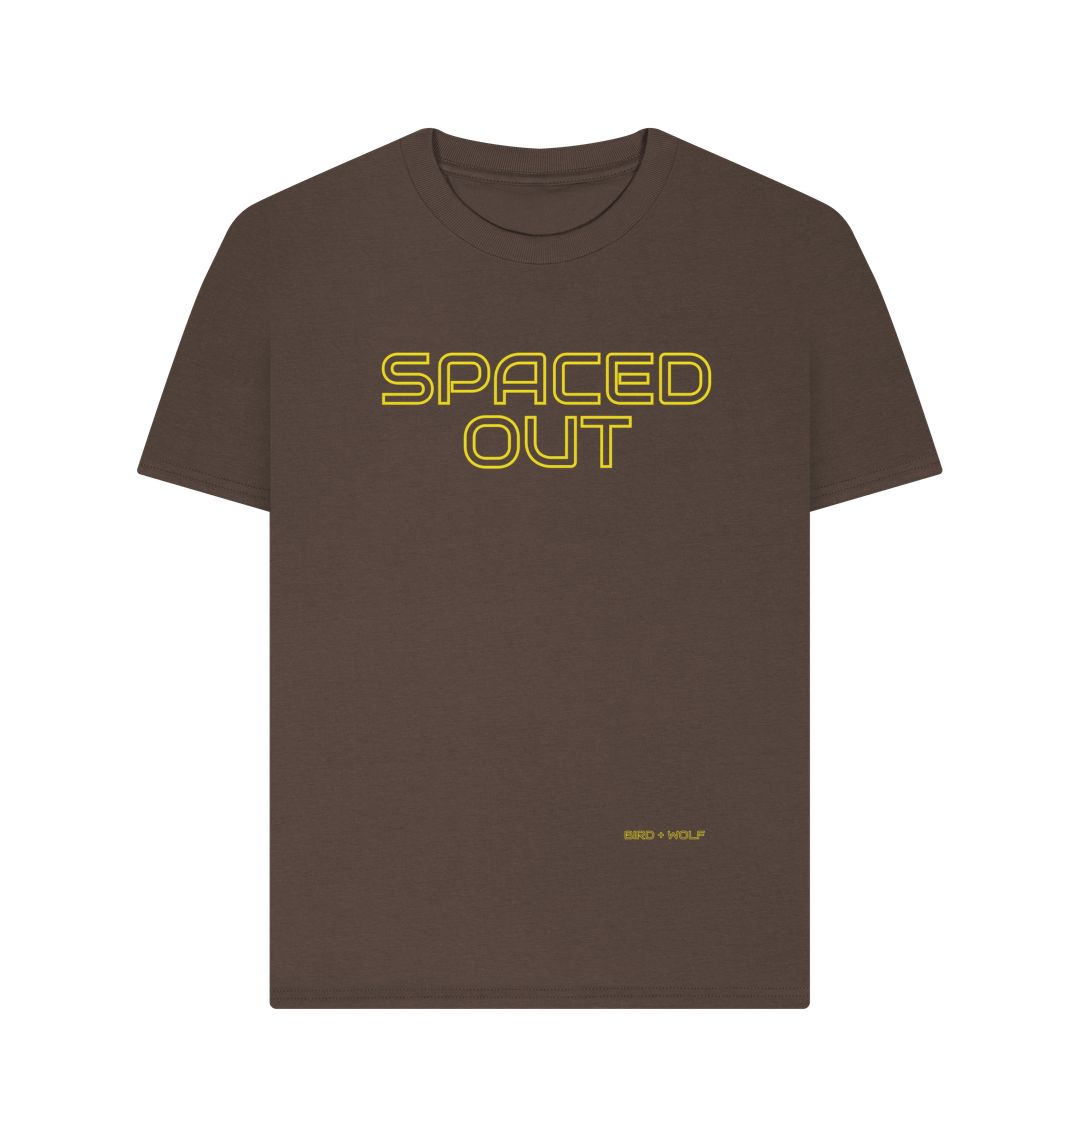 Chocolate Spaced Out Plain Tee